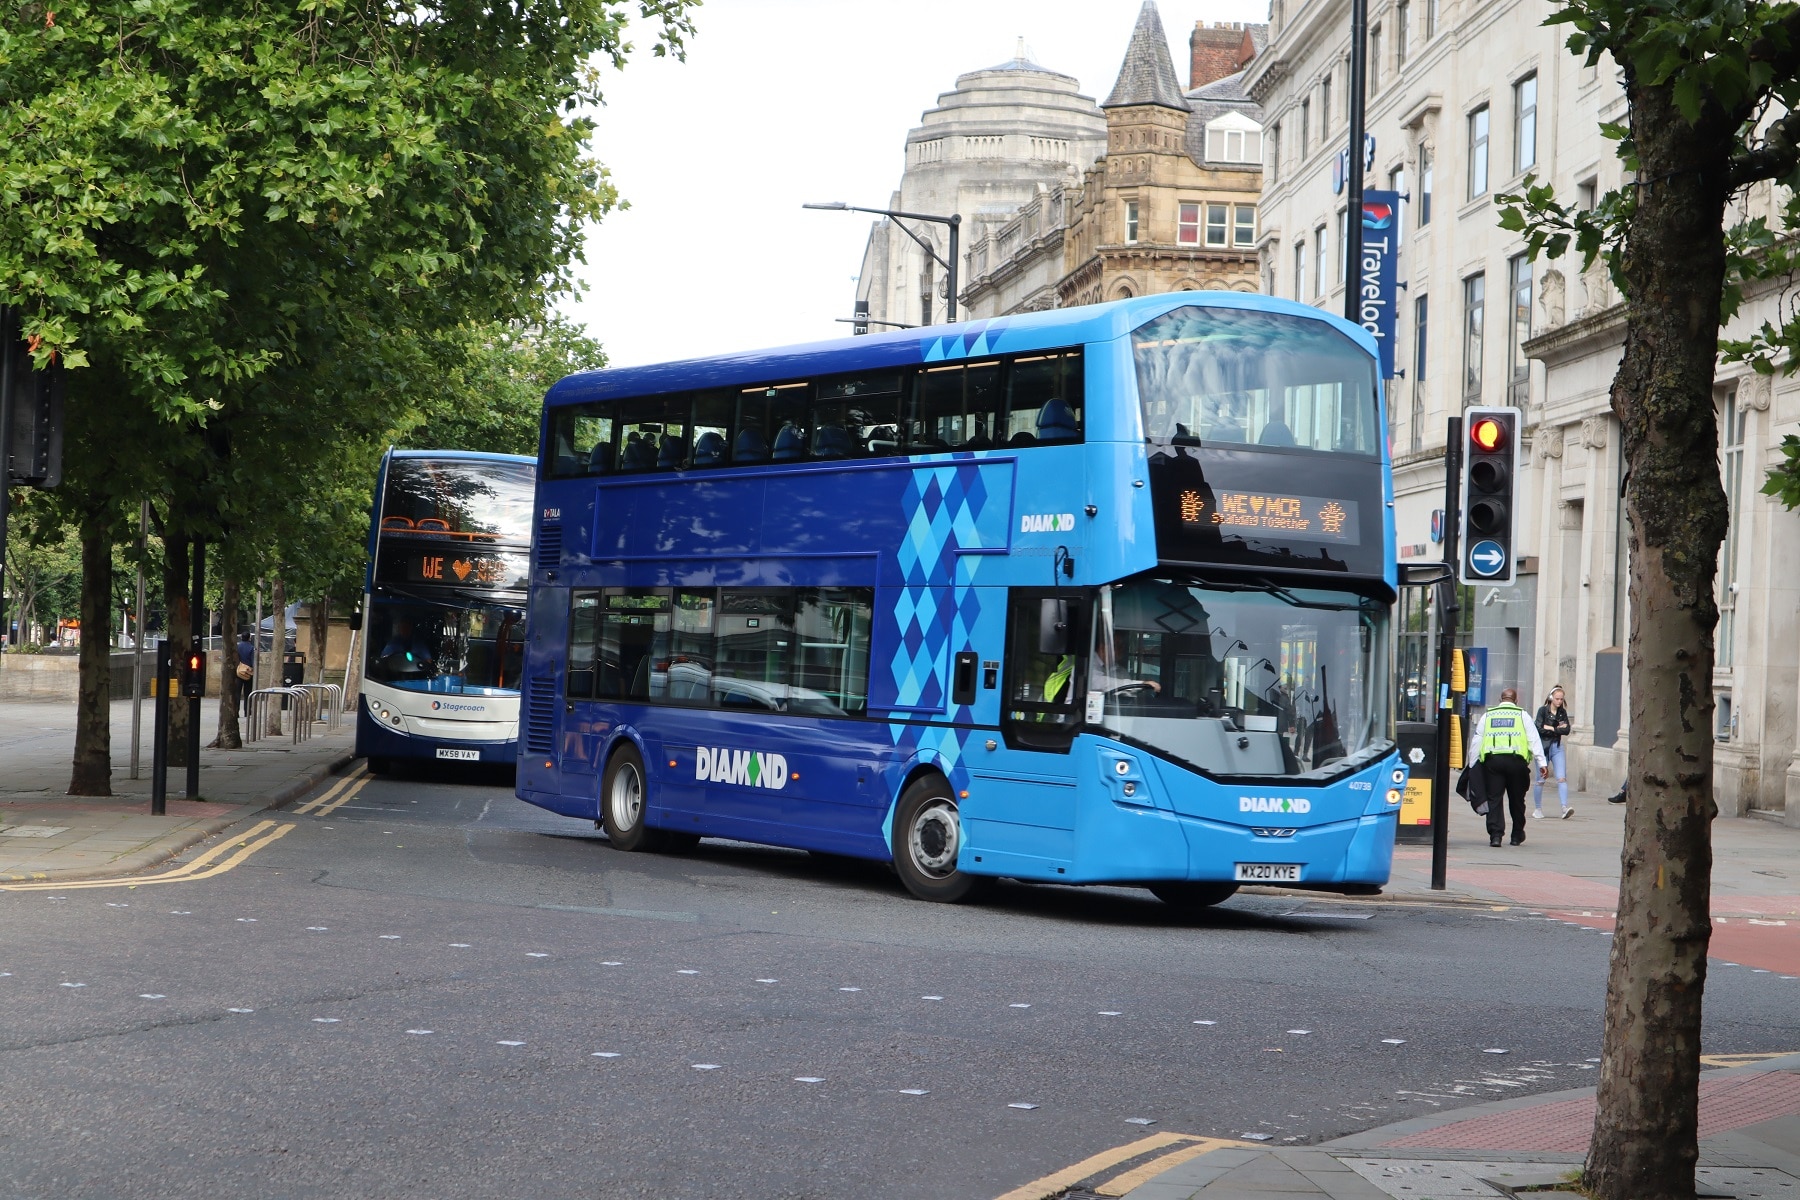 Greater Manchester bus franchising